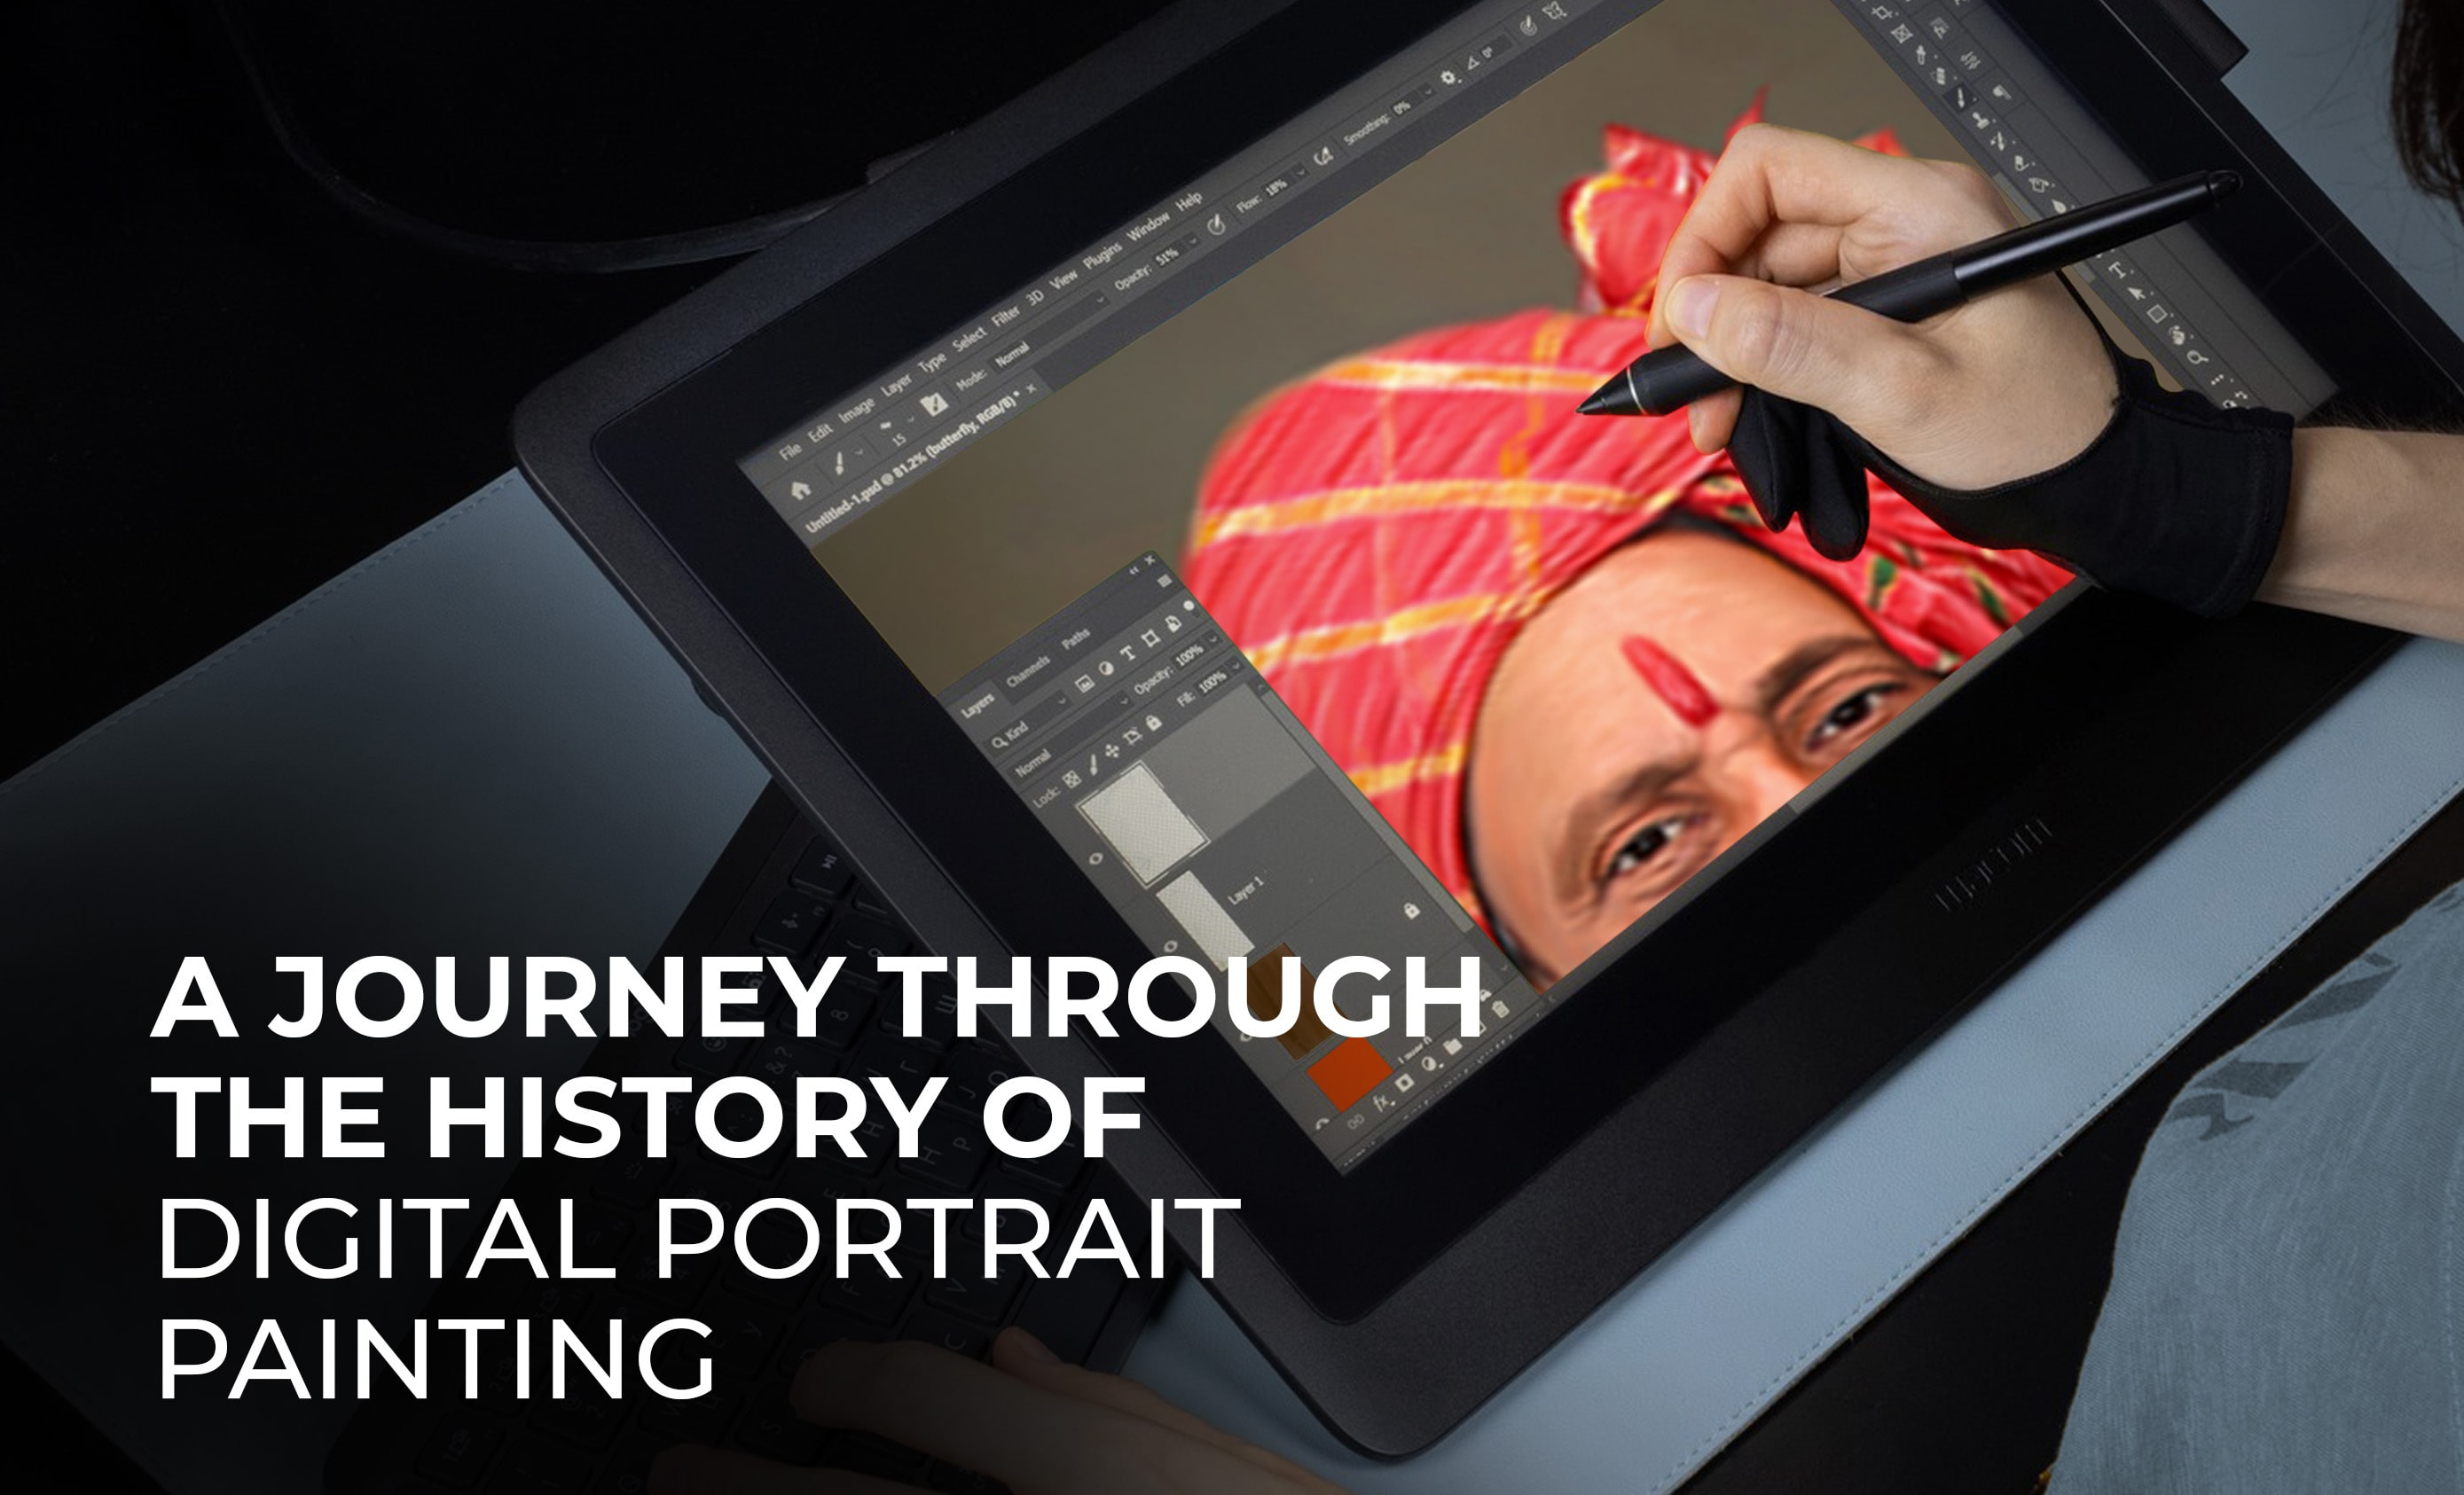 A Journey Through the History of Digital Portrait Painting